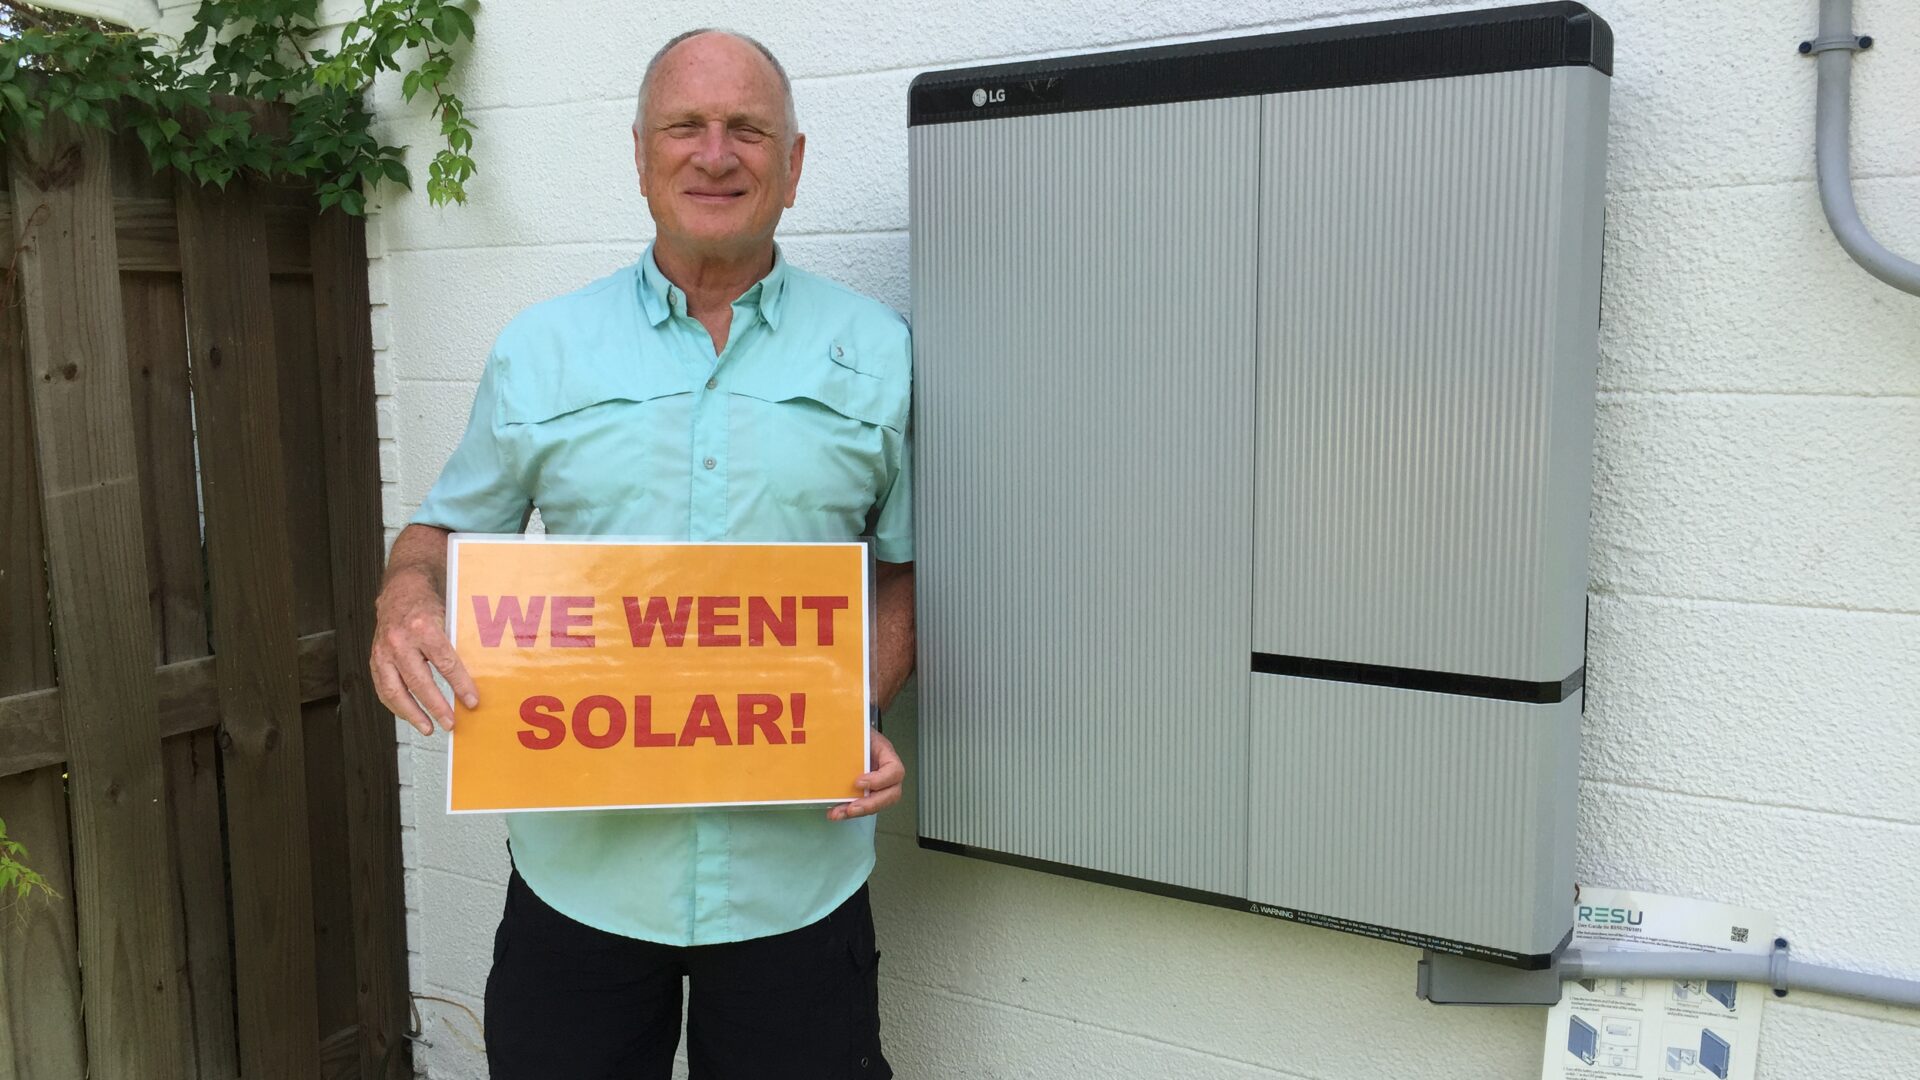 Man holding a sign that reads "We went solar" standing next to battery storage unit on the side of a house.